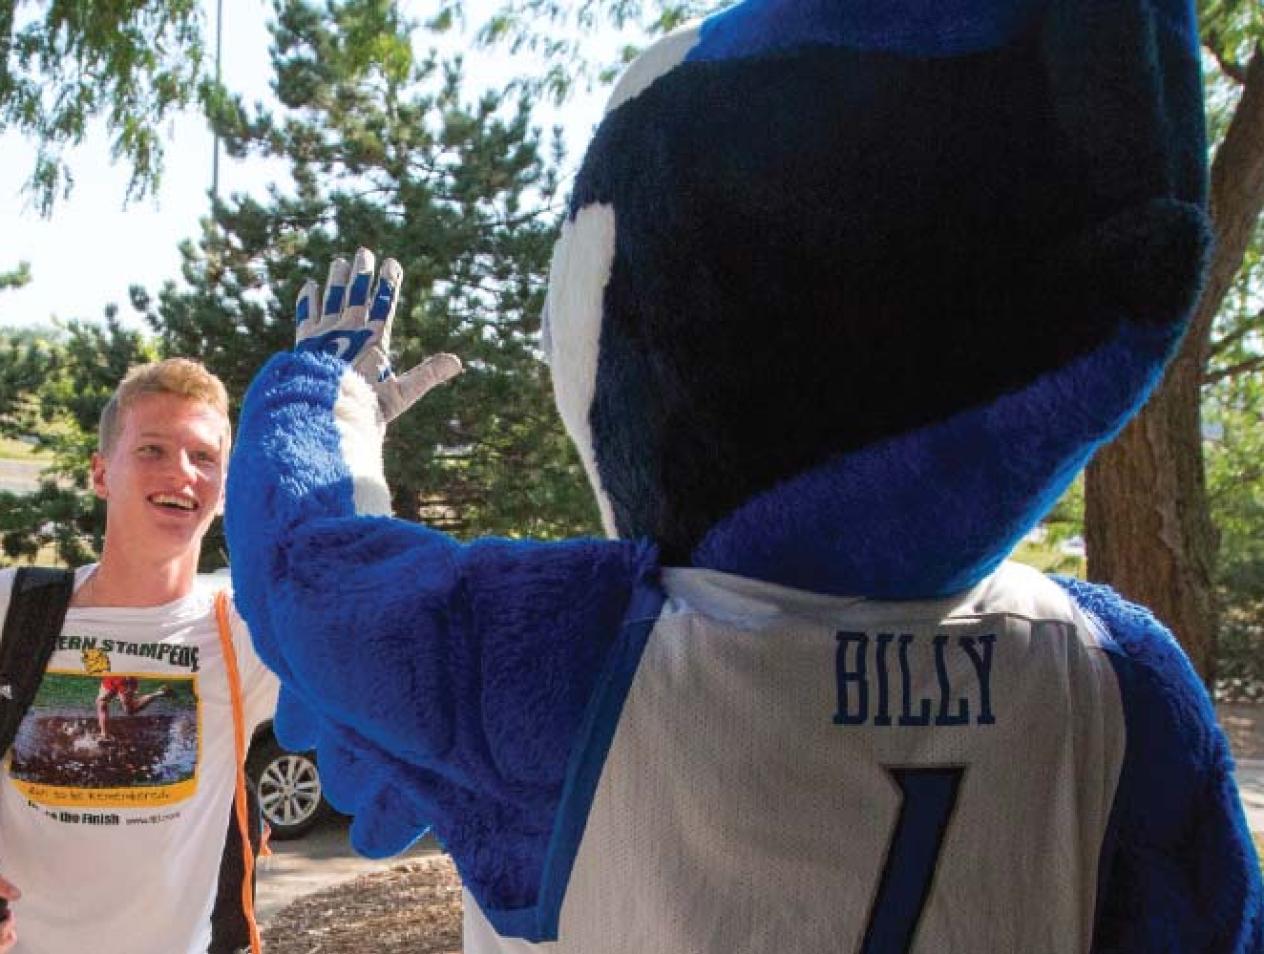 Creighton student high fives Billy Bluejay